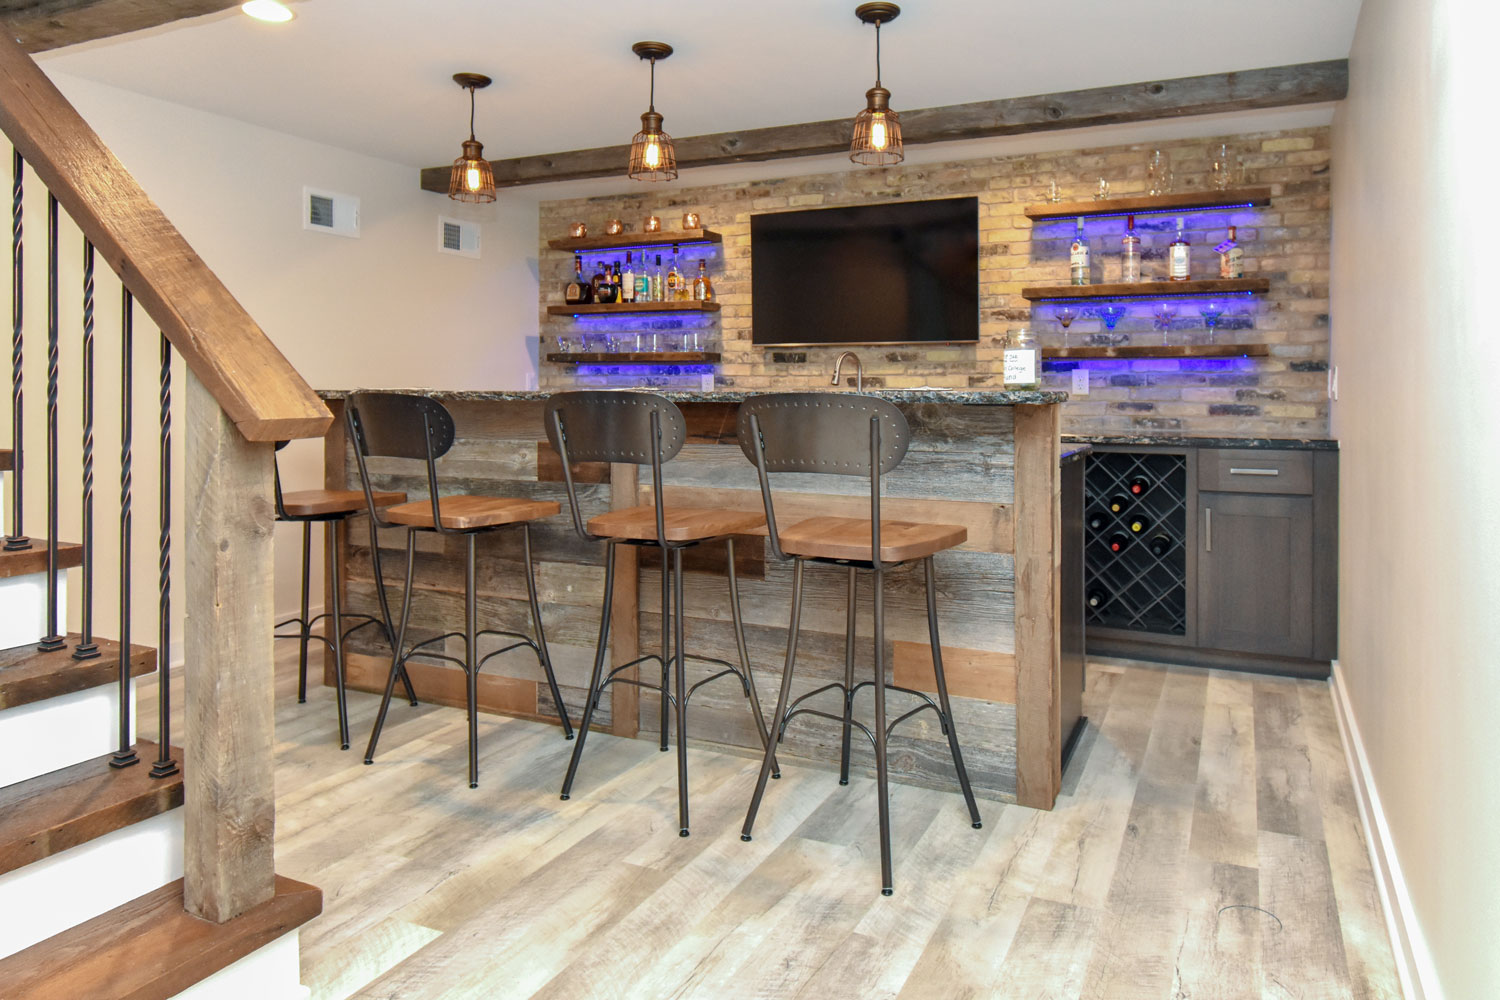 How To Build A Bar In Basement